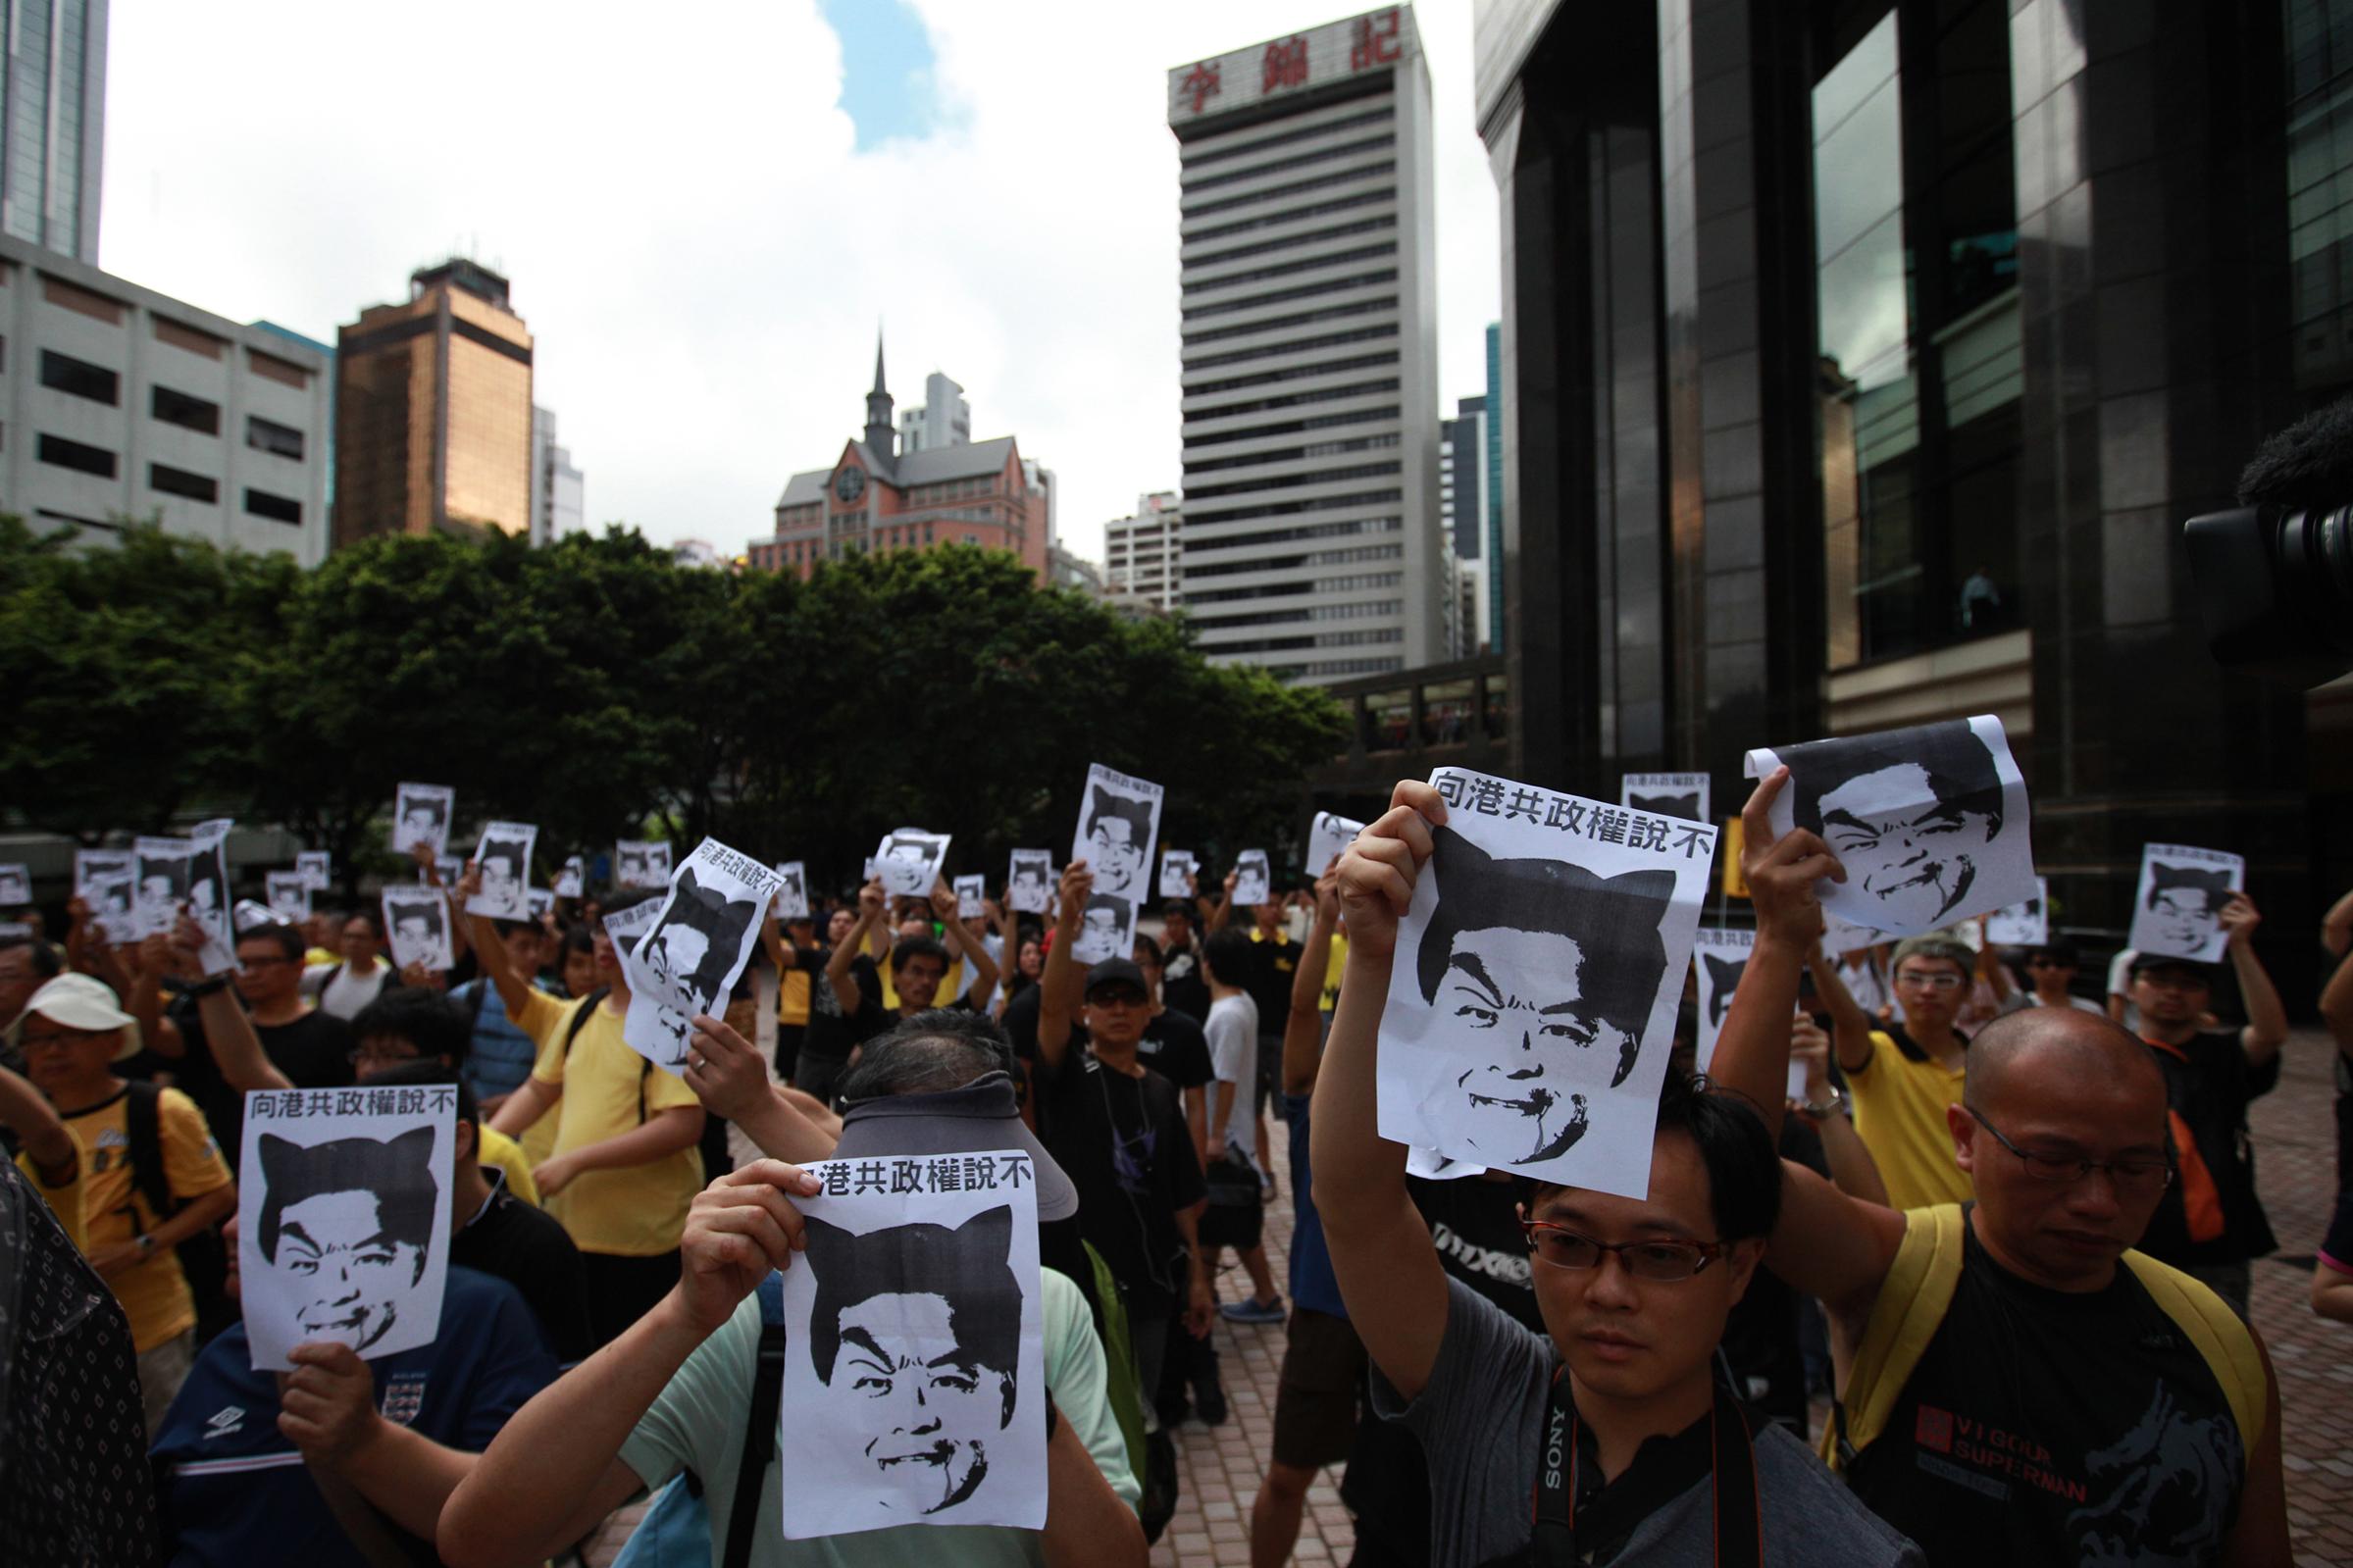 Protesters hold up pictures of Hong Kong Chief Executive-elect Leung Chun-ying during a protest against Leung in Hong Kong on July 1, 2012. Hong Kong installs a new leader and marks 15 years of Chinese rule, at a time of strong anti-Beijing sentiment after Hu was targeted by angry protesters.